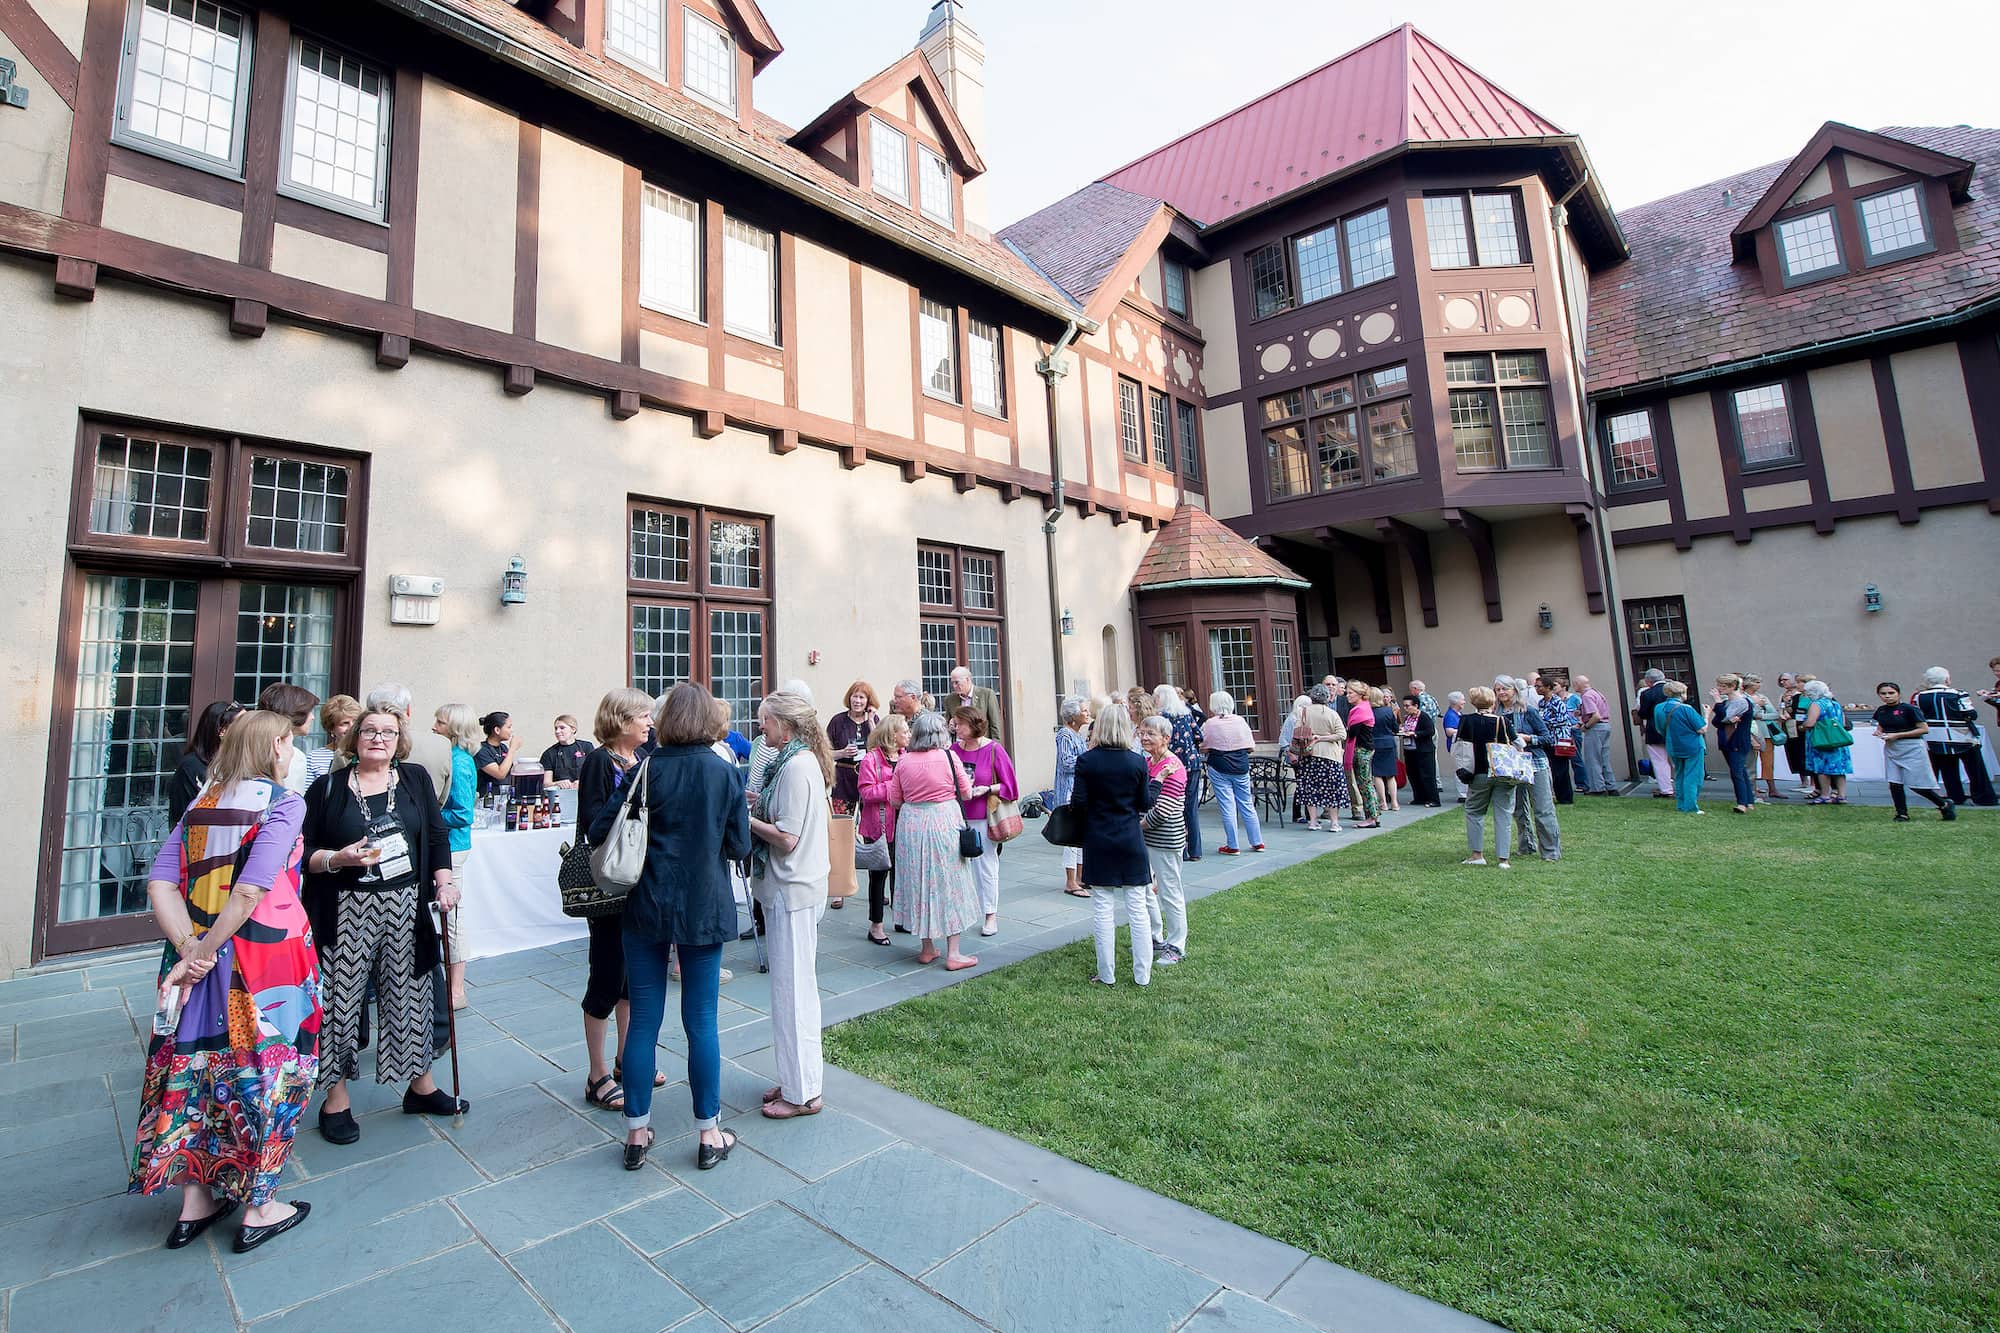 Gathering of people in the Alumnae House courtyard